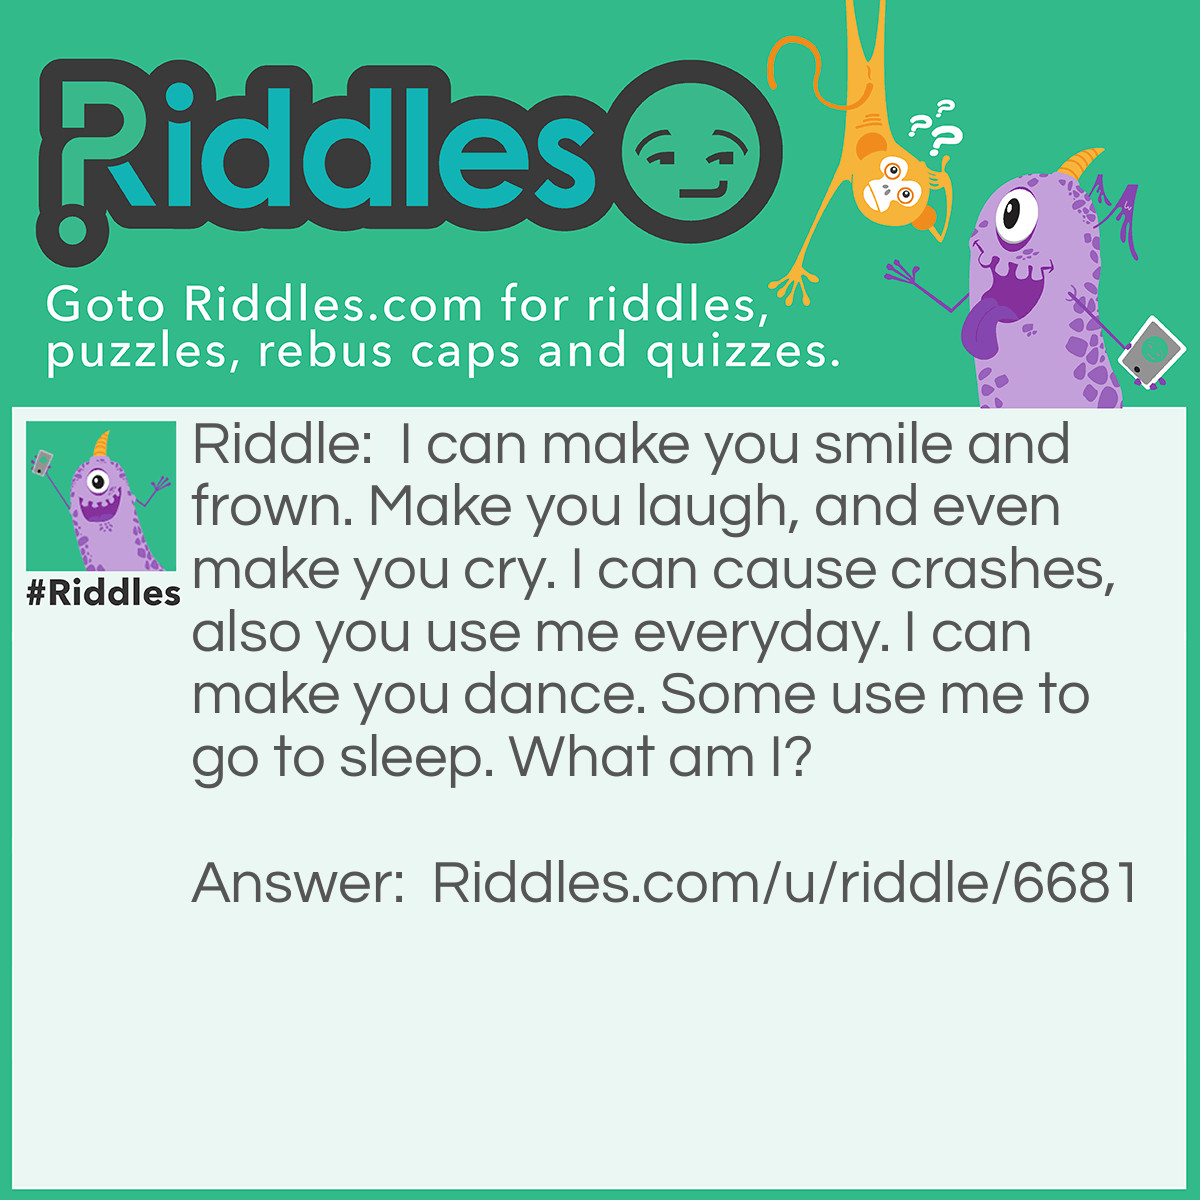 Riddle: I can make you smile and frown. Make you laugh, and even make you cry. I can cause crashes, also you use me everyday. I can make you dance. Some use me to go to sleep. What am I? Answer: Your smart phone!